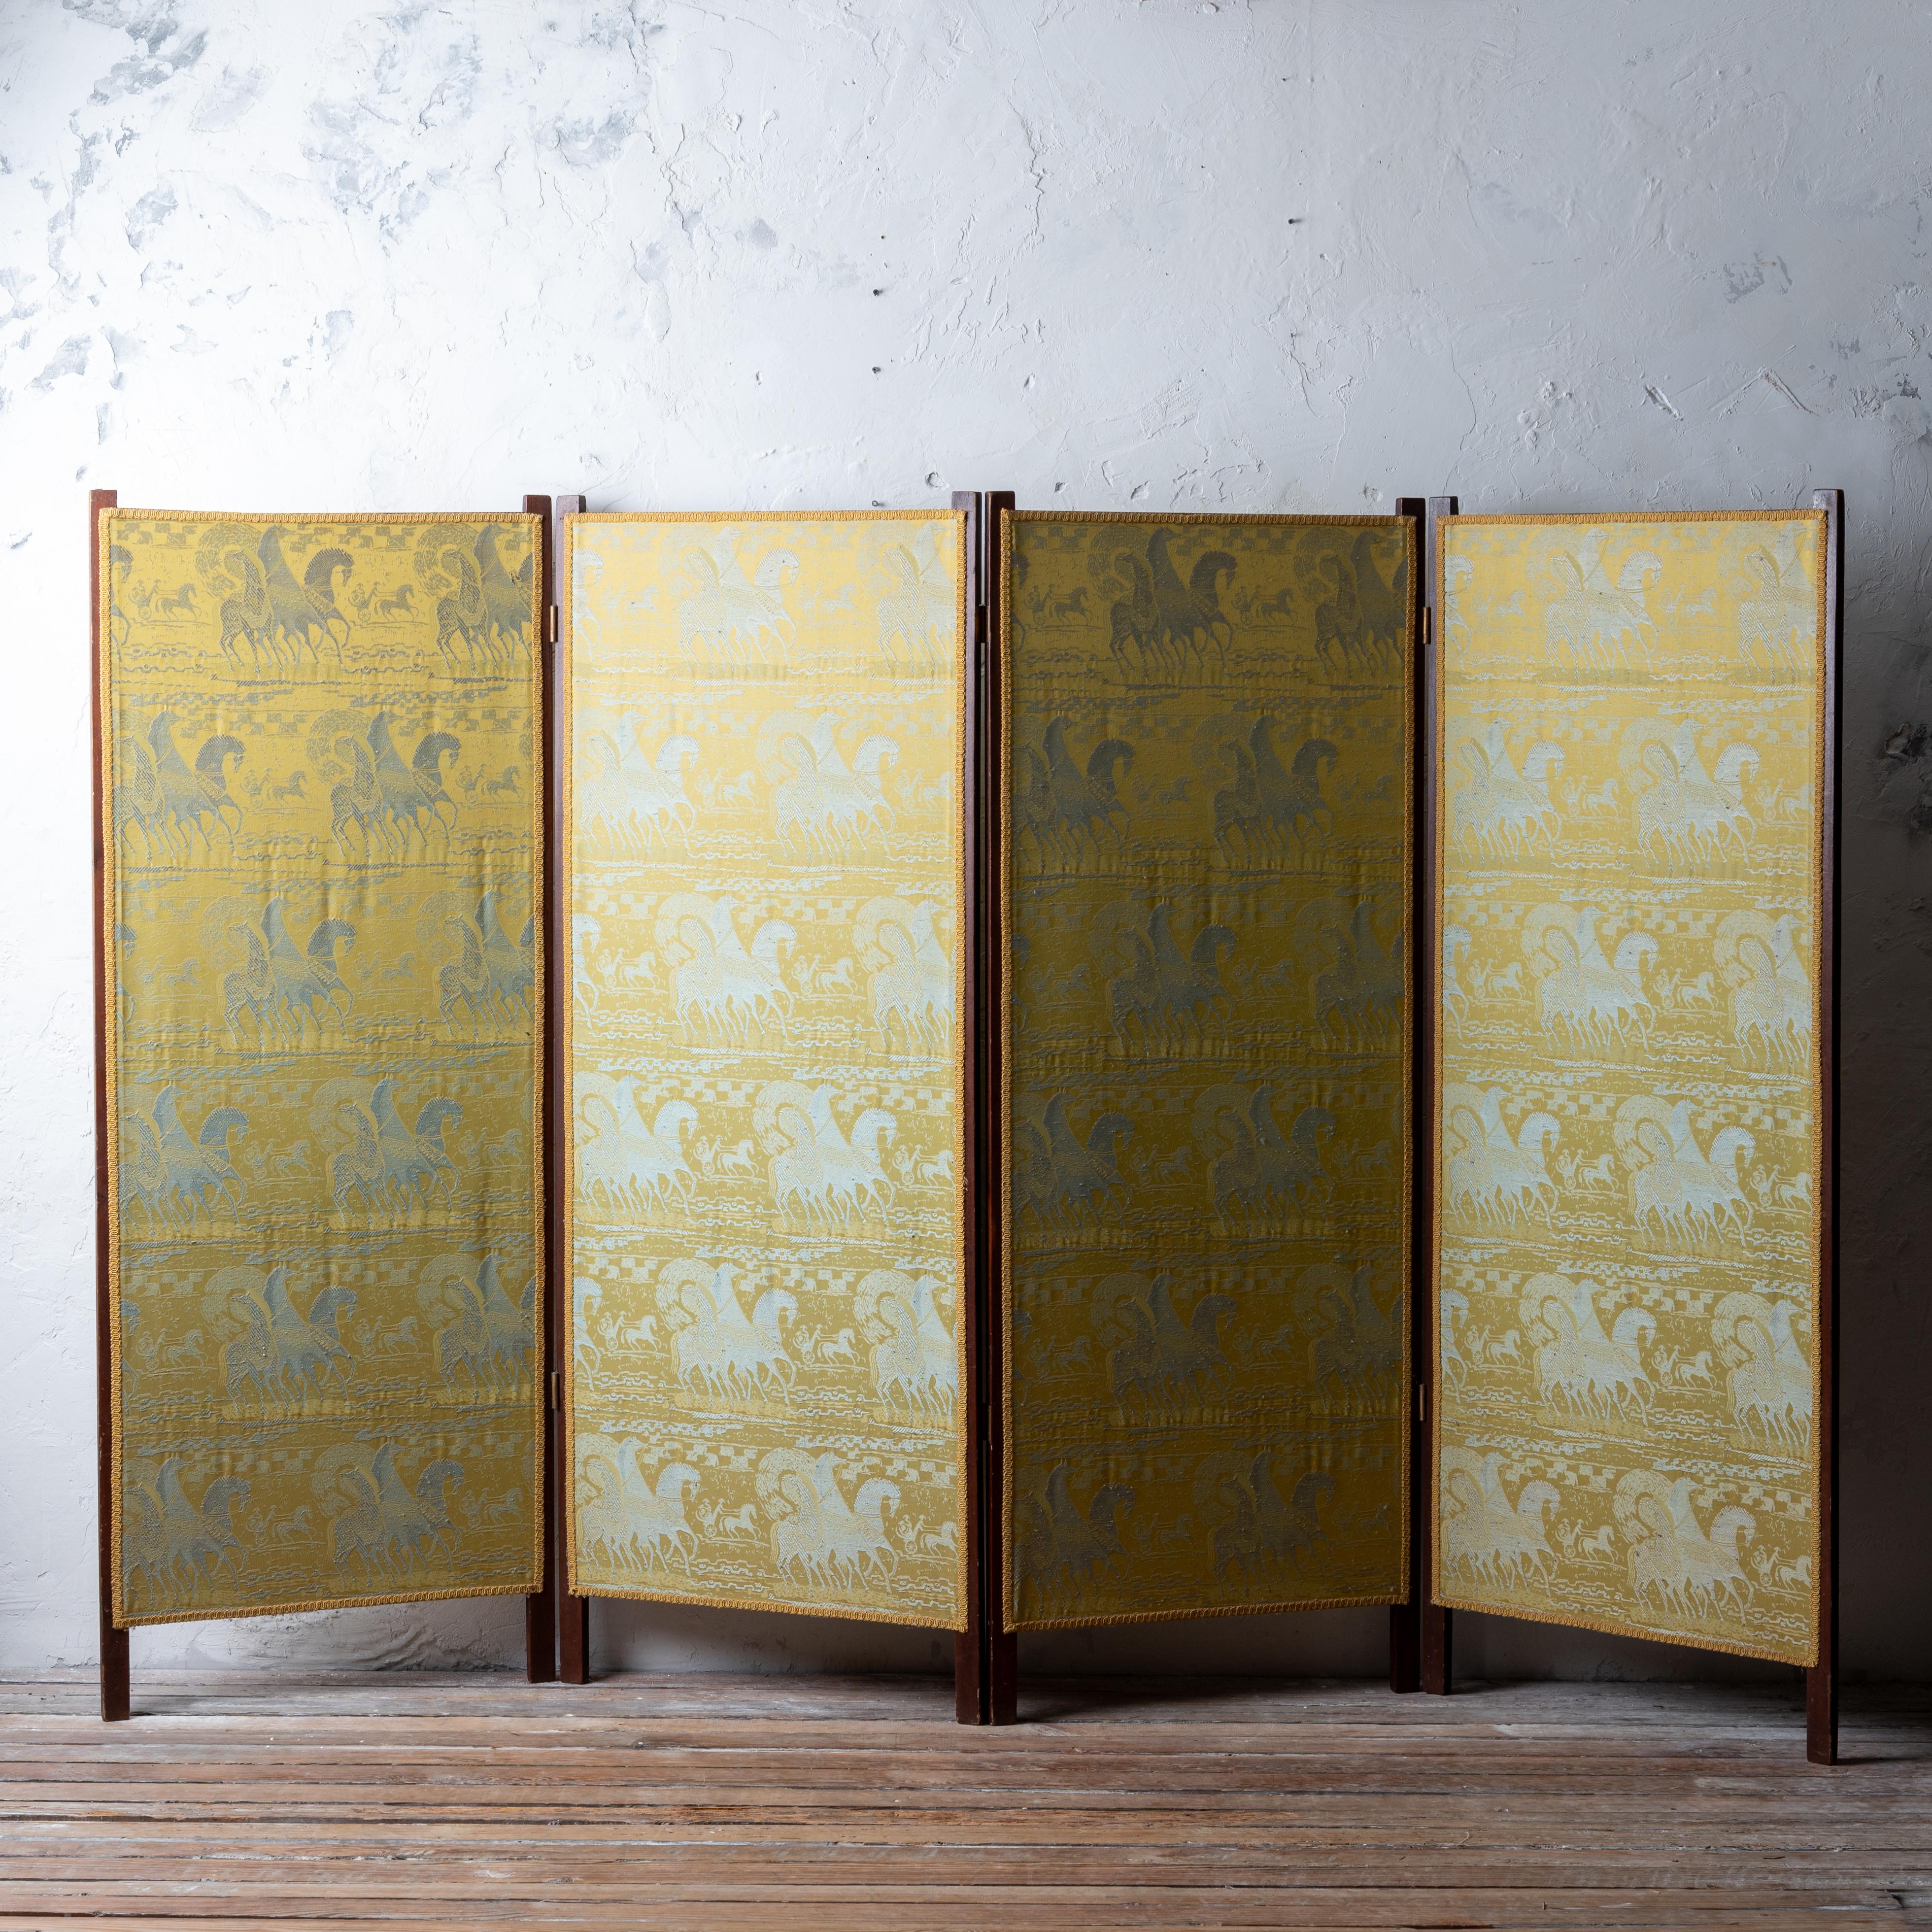 A four panel antique mahogany folding screen with a special Tibor Reich etruscan horse jacquard fabric from the 1960s.  Both front and back are upholstered and pictured.

101 inches fully extended 
66 inches tall
25 ¼ inches wide, each panel


